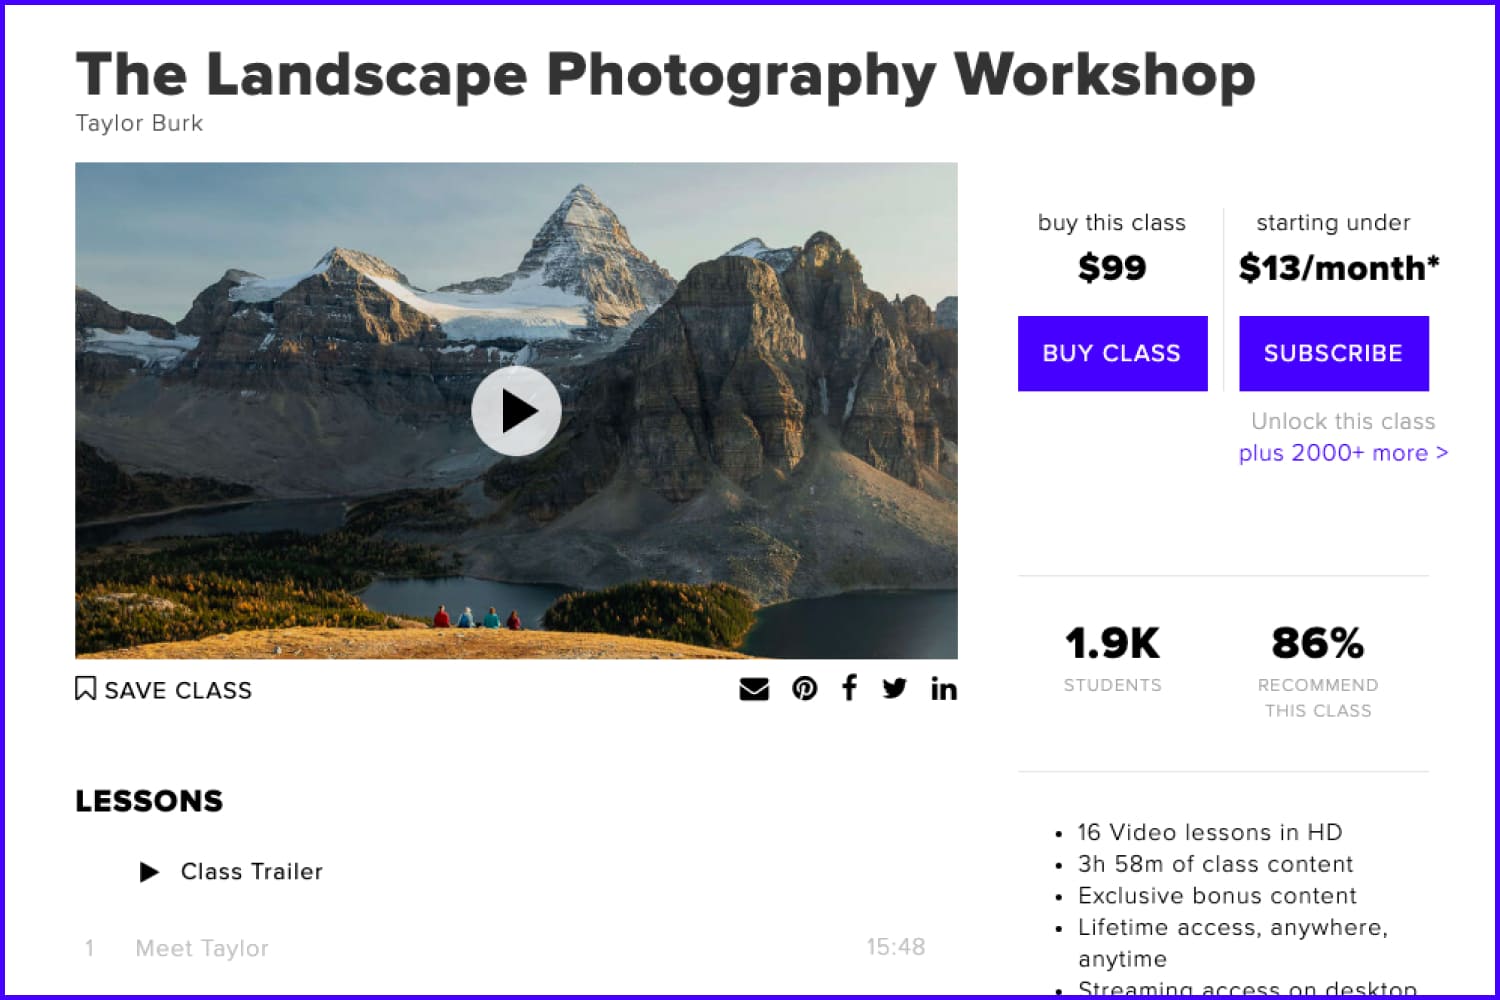 Screenshot of the main page of The Landscape Photography Workshop website.